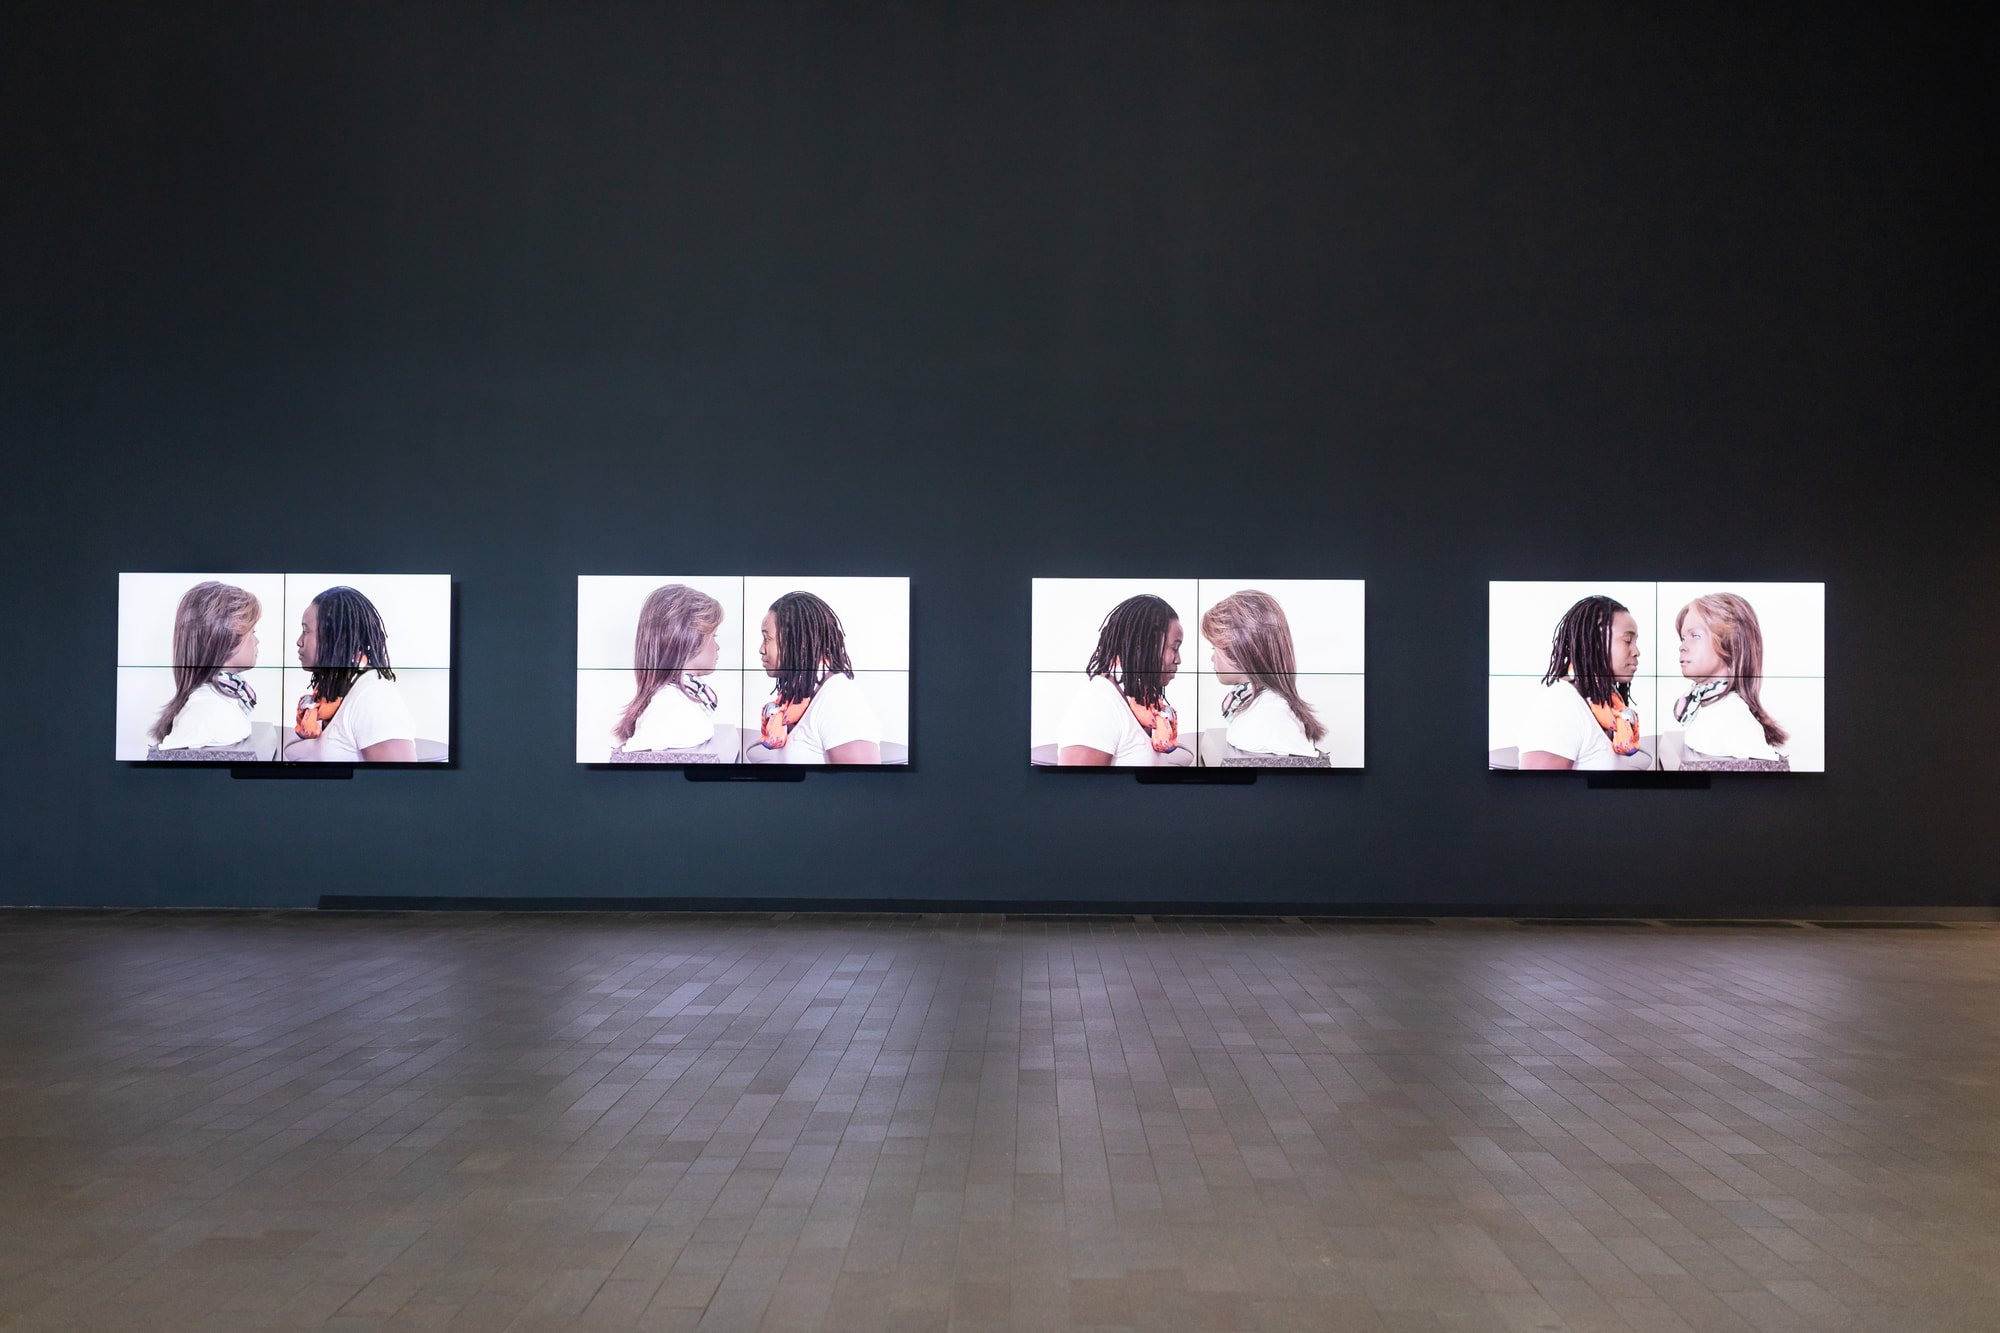 Installation view of four screens aligned on a wall. Each screen shows Stephanie Dinkins facing Bina48 on a white background